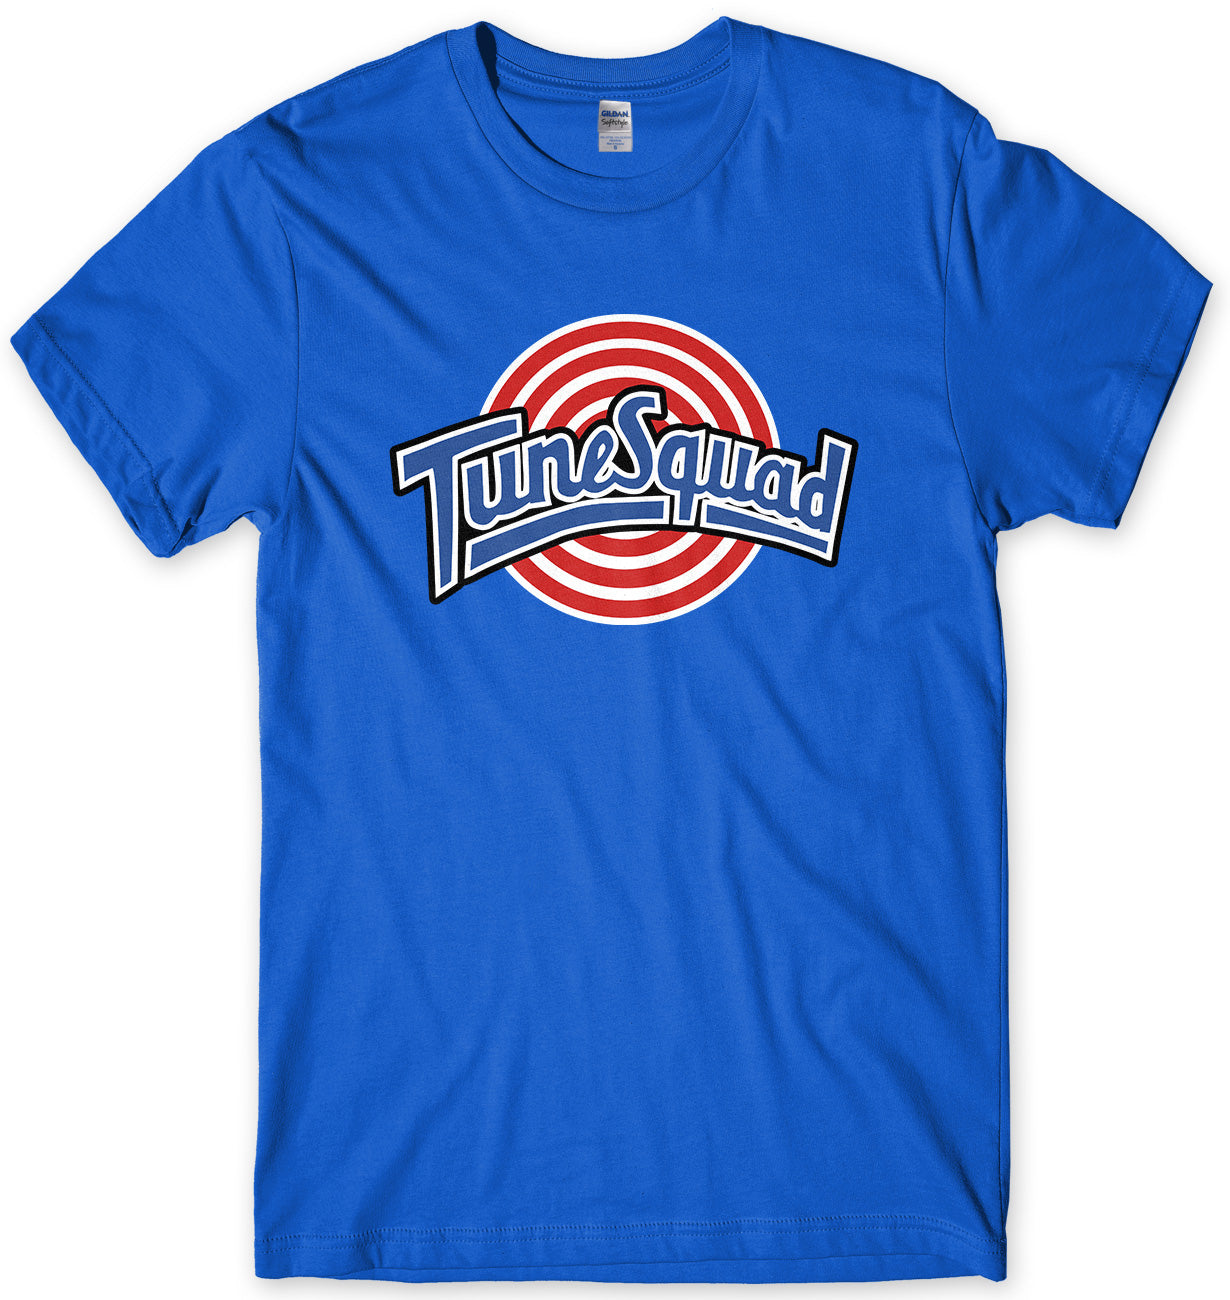 TUNE SQUAD - INSPIRED BY SPACE JAM MENS UNISEX T-SHIRT